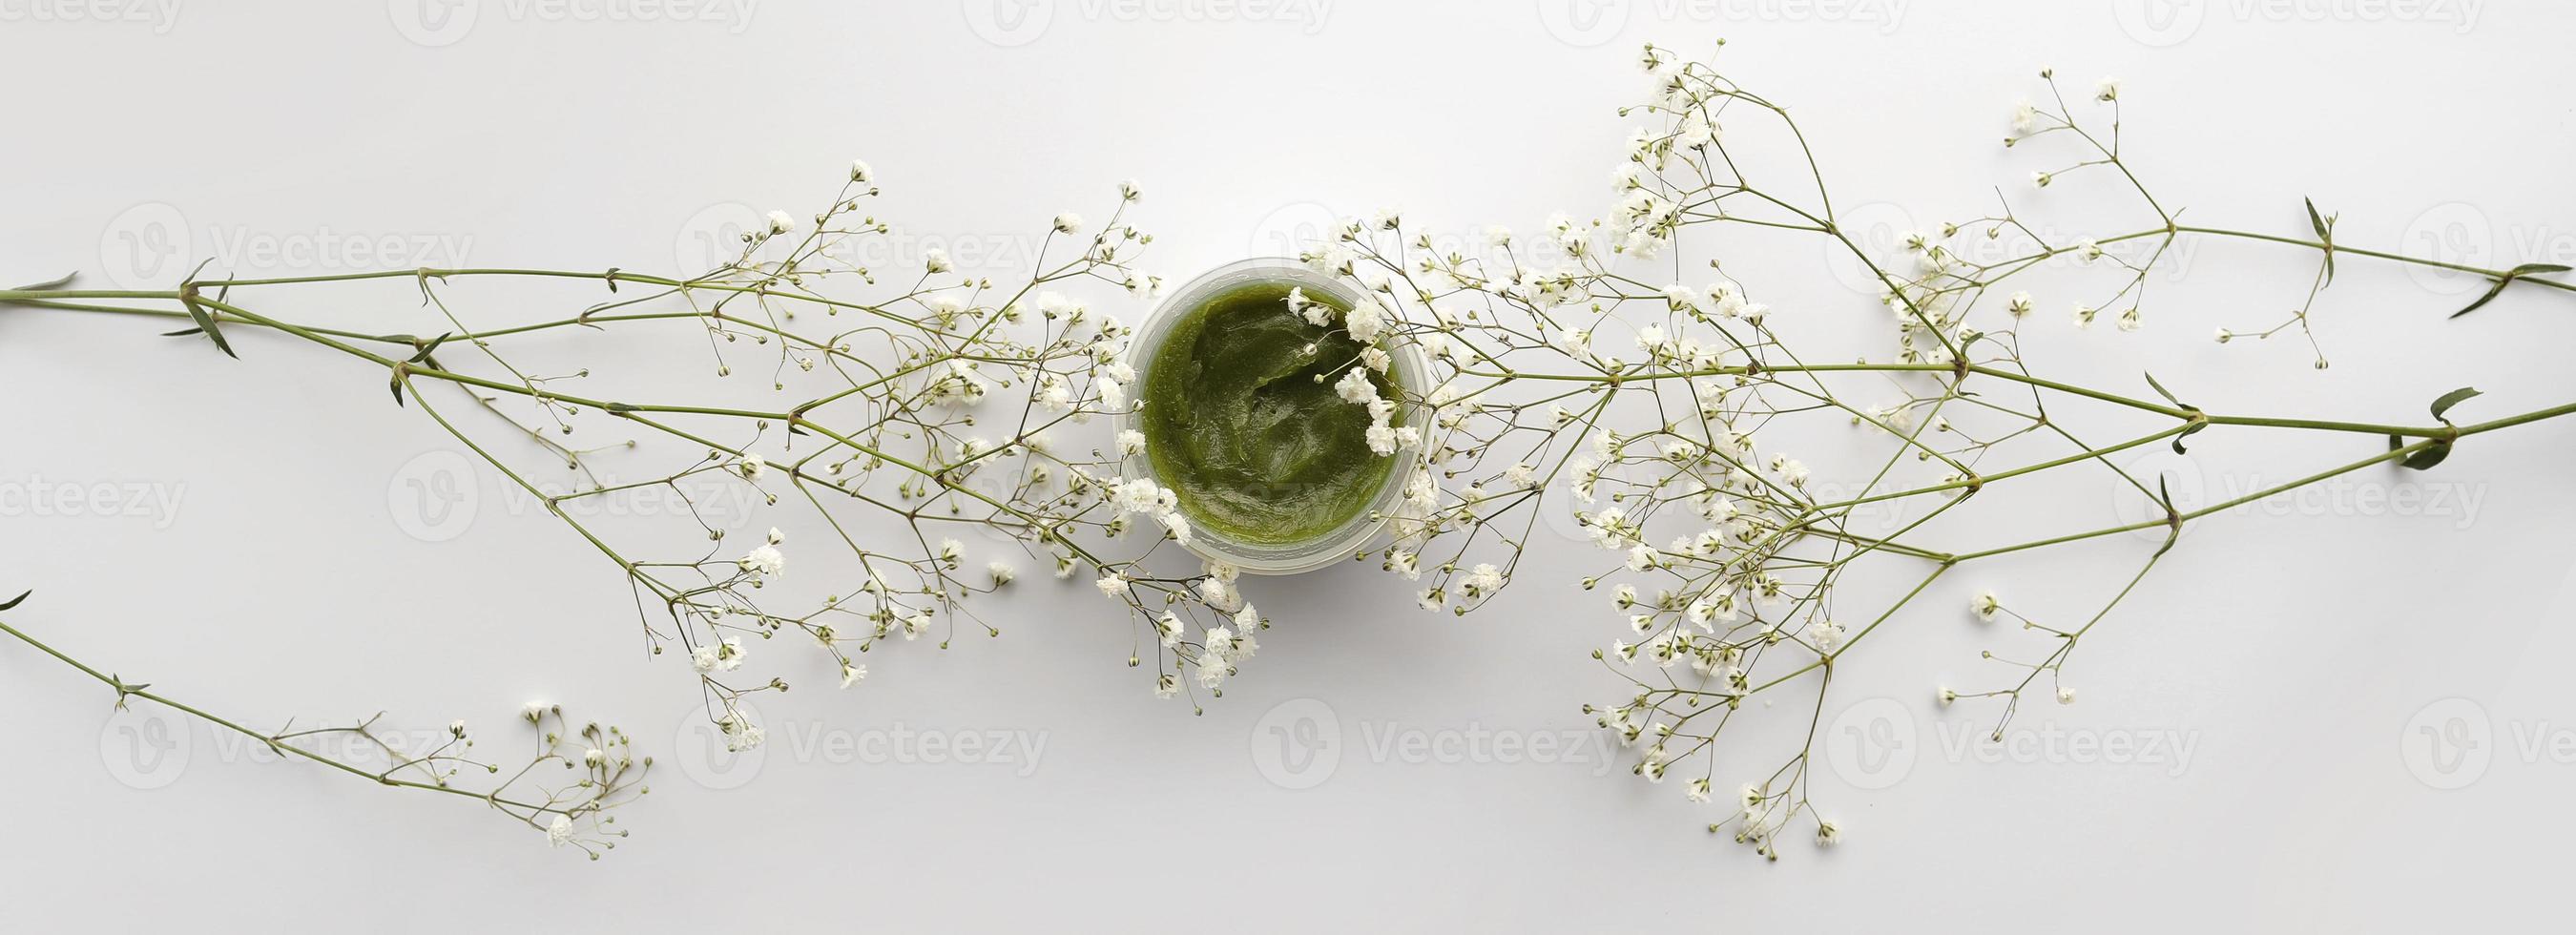 baner of organic face cream in container and white flowers on white background. Home made remedy and beauty product concept. Top view. Copy space. photo